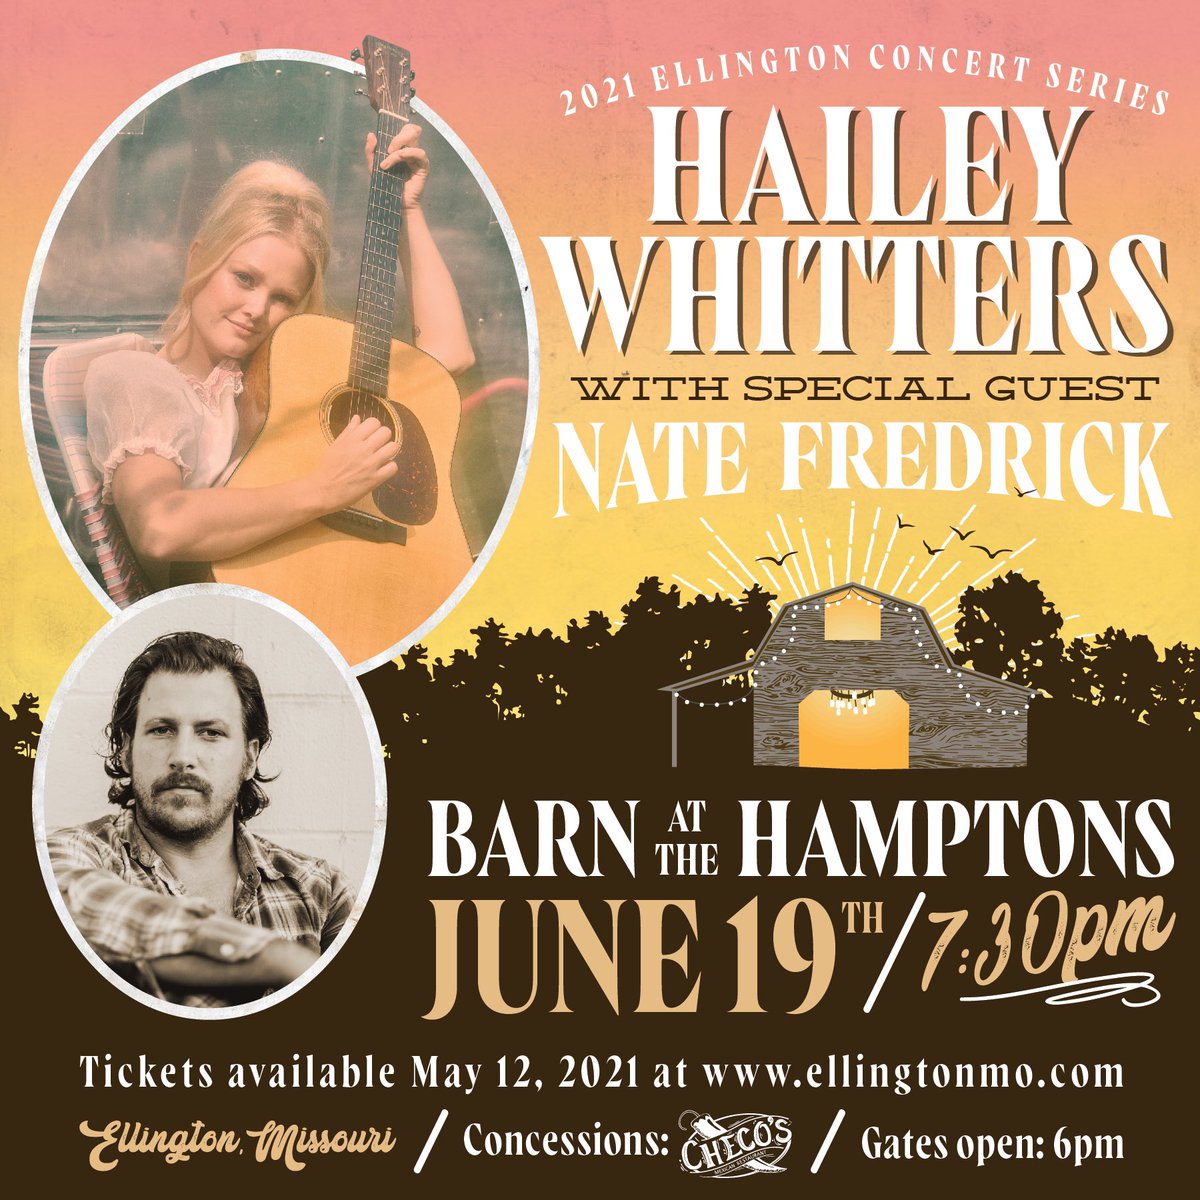 Just announced—can’t wait to join the incredibly talented @haileywhitters in Ellington, MO on June 19th! Tickets go on sale May 12